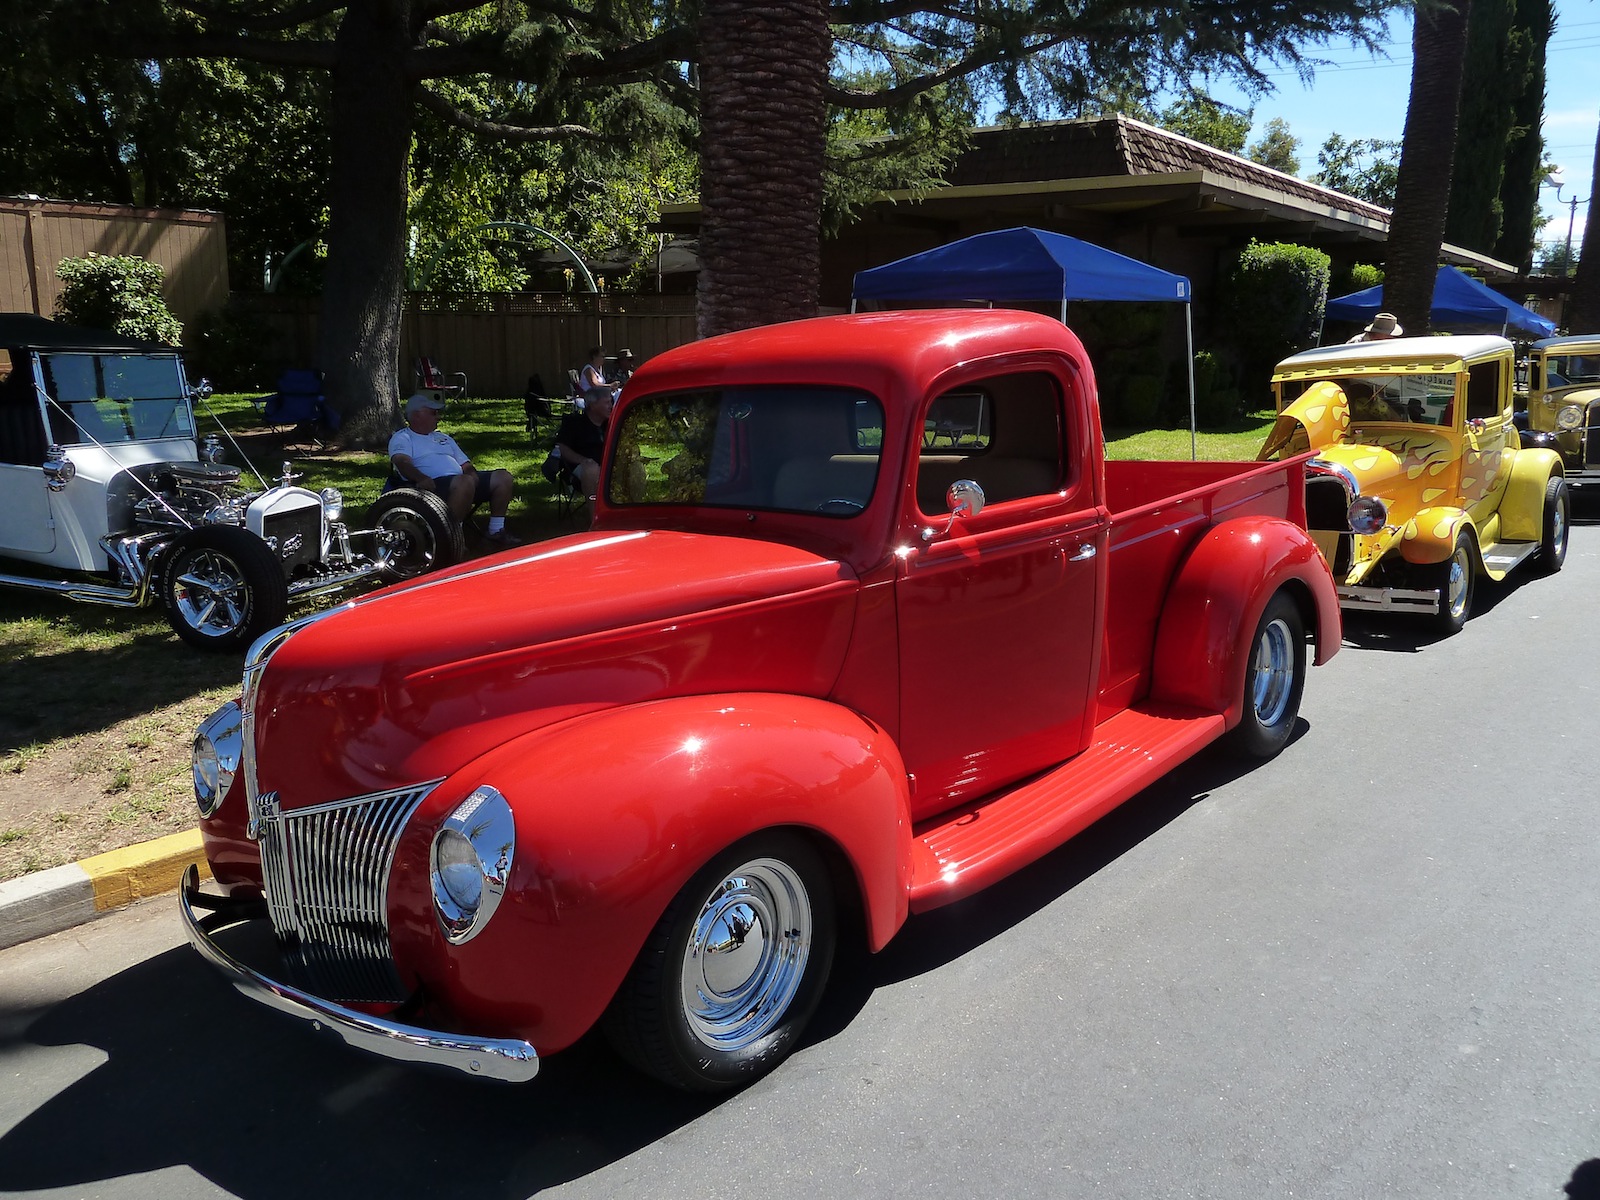 Pickup Trucks – An Opportunity For A Progressive Concours d’Elegance?